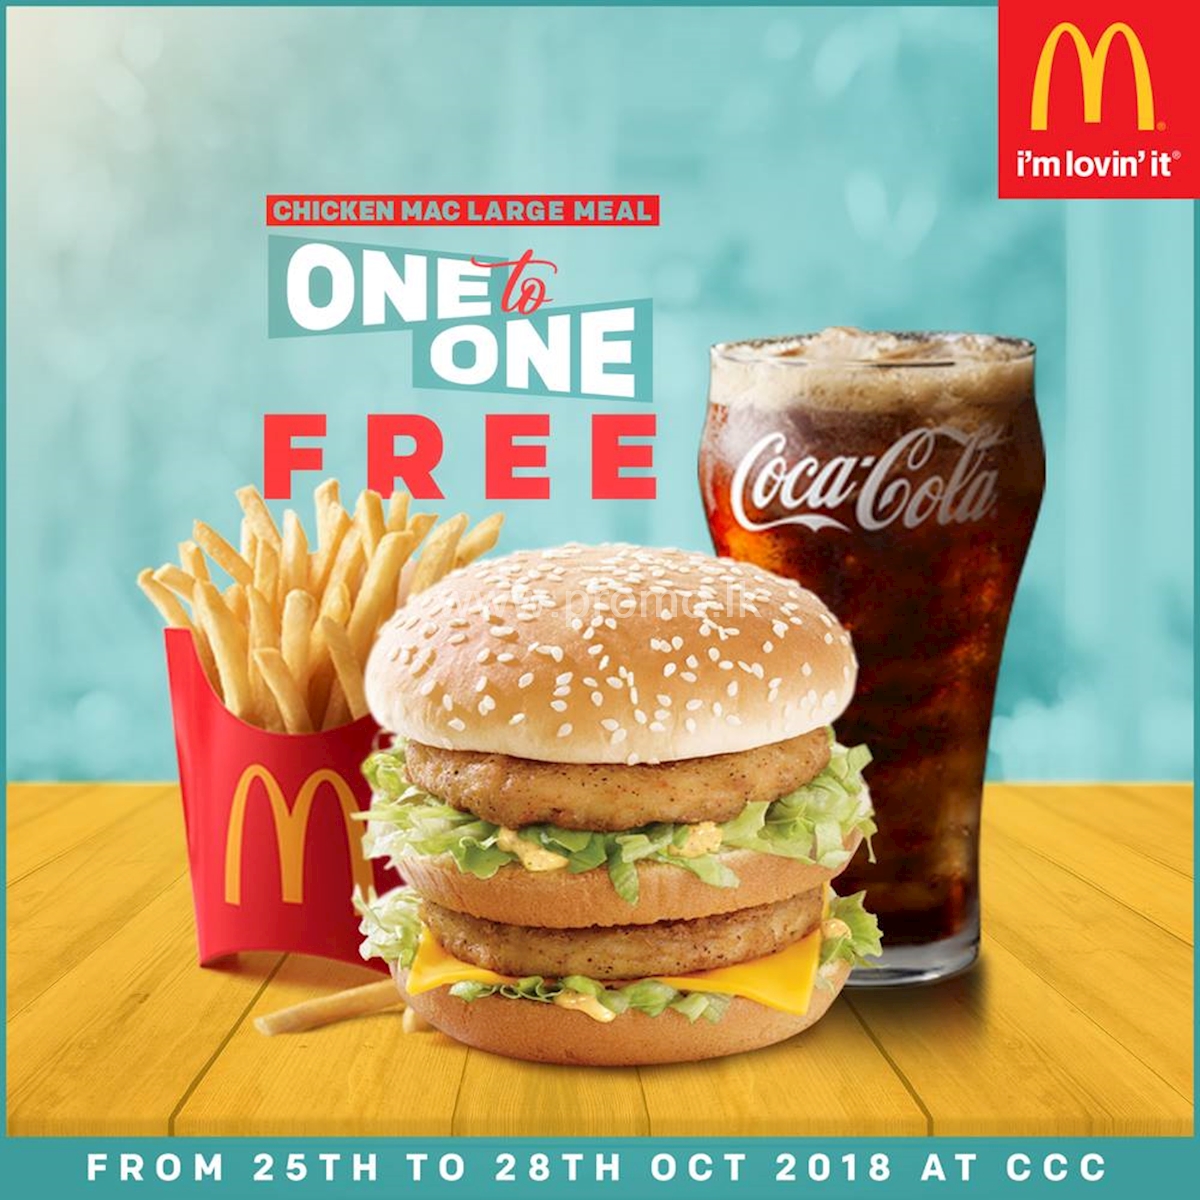 Buy 1 Get 1 Free on Chicken Mac Large Meal from McDonald's